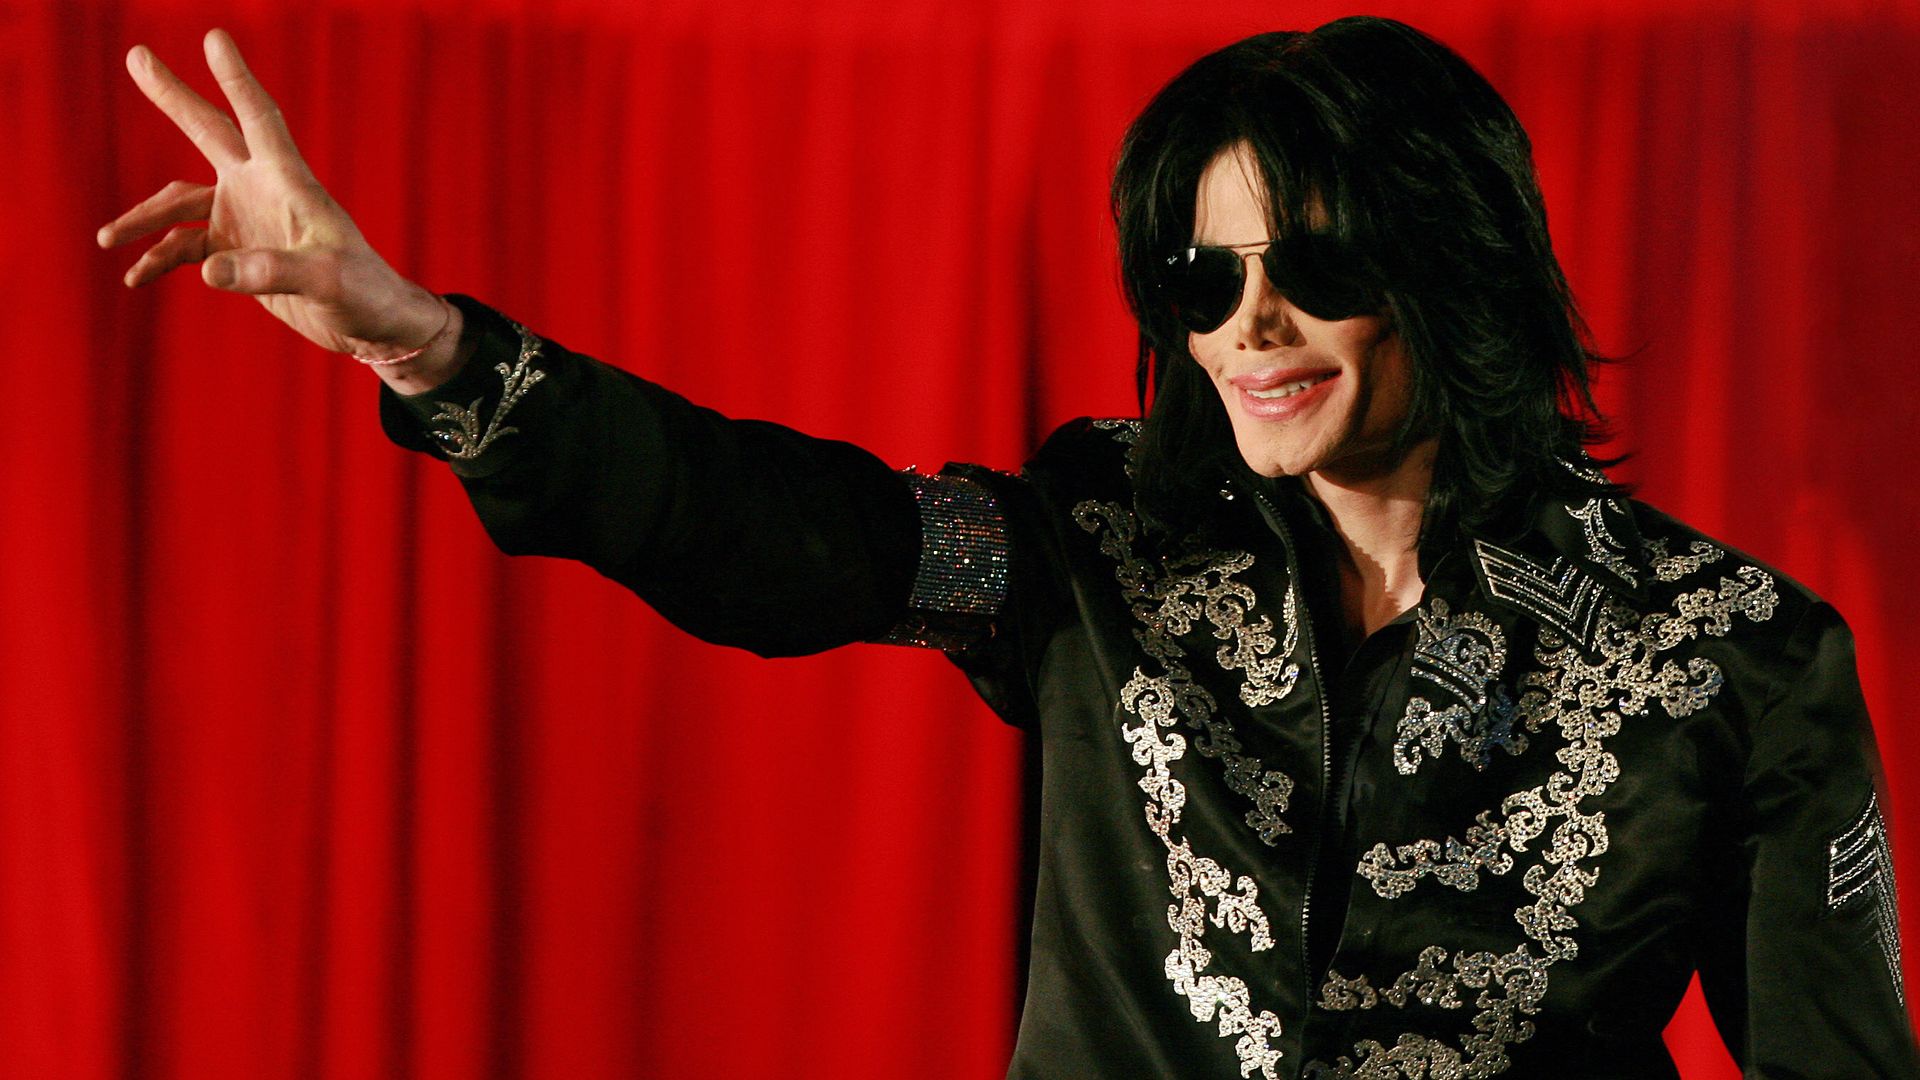 Michael Jackson at the press conference announcing his 2009 comeback tour